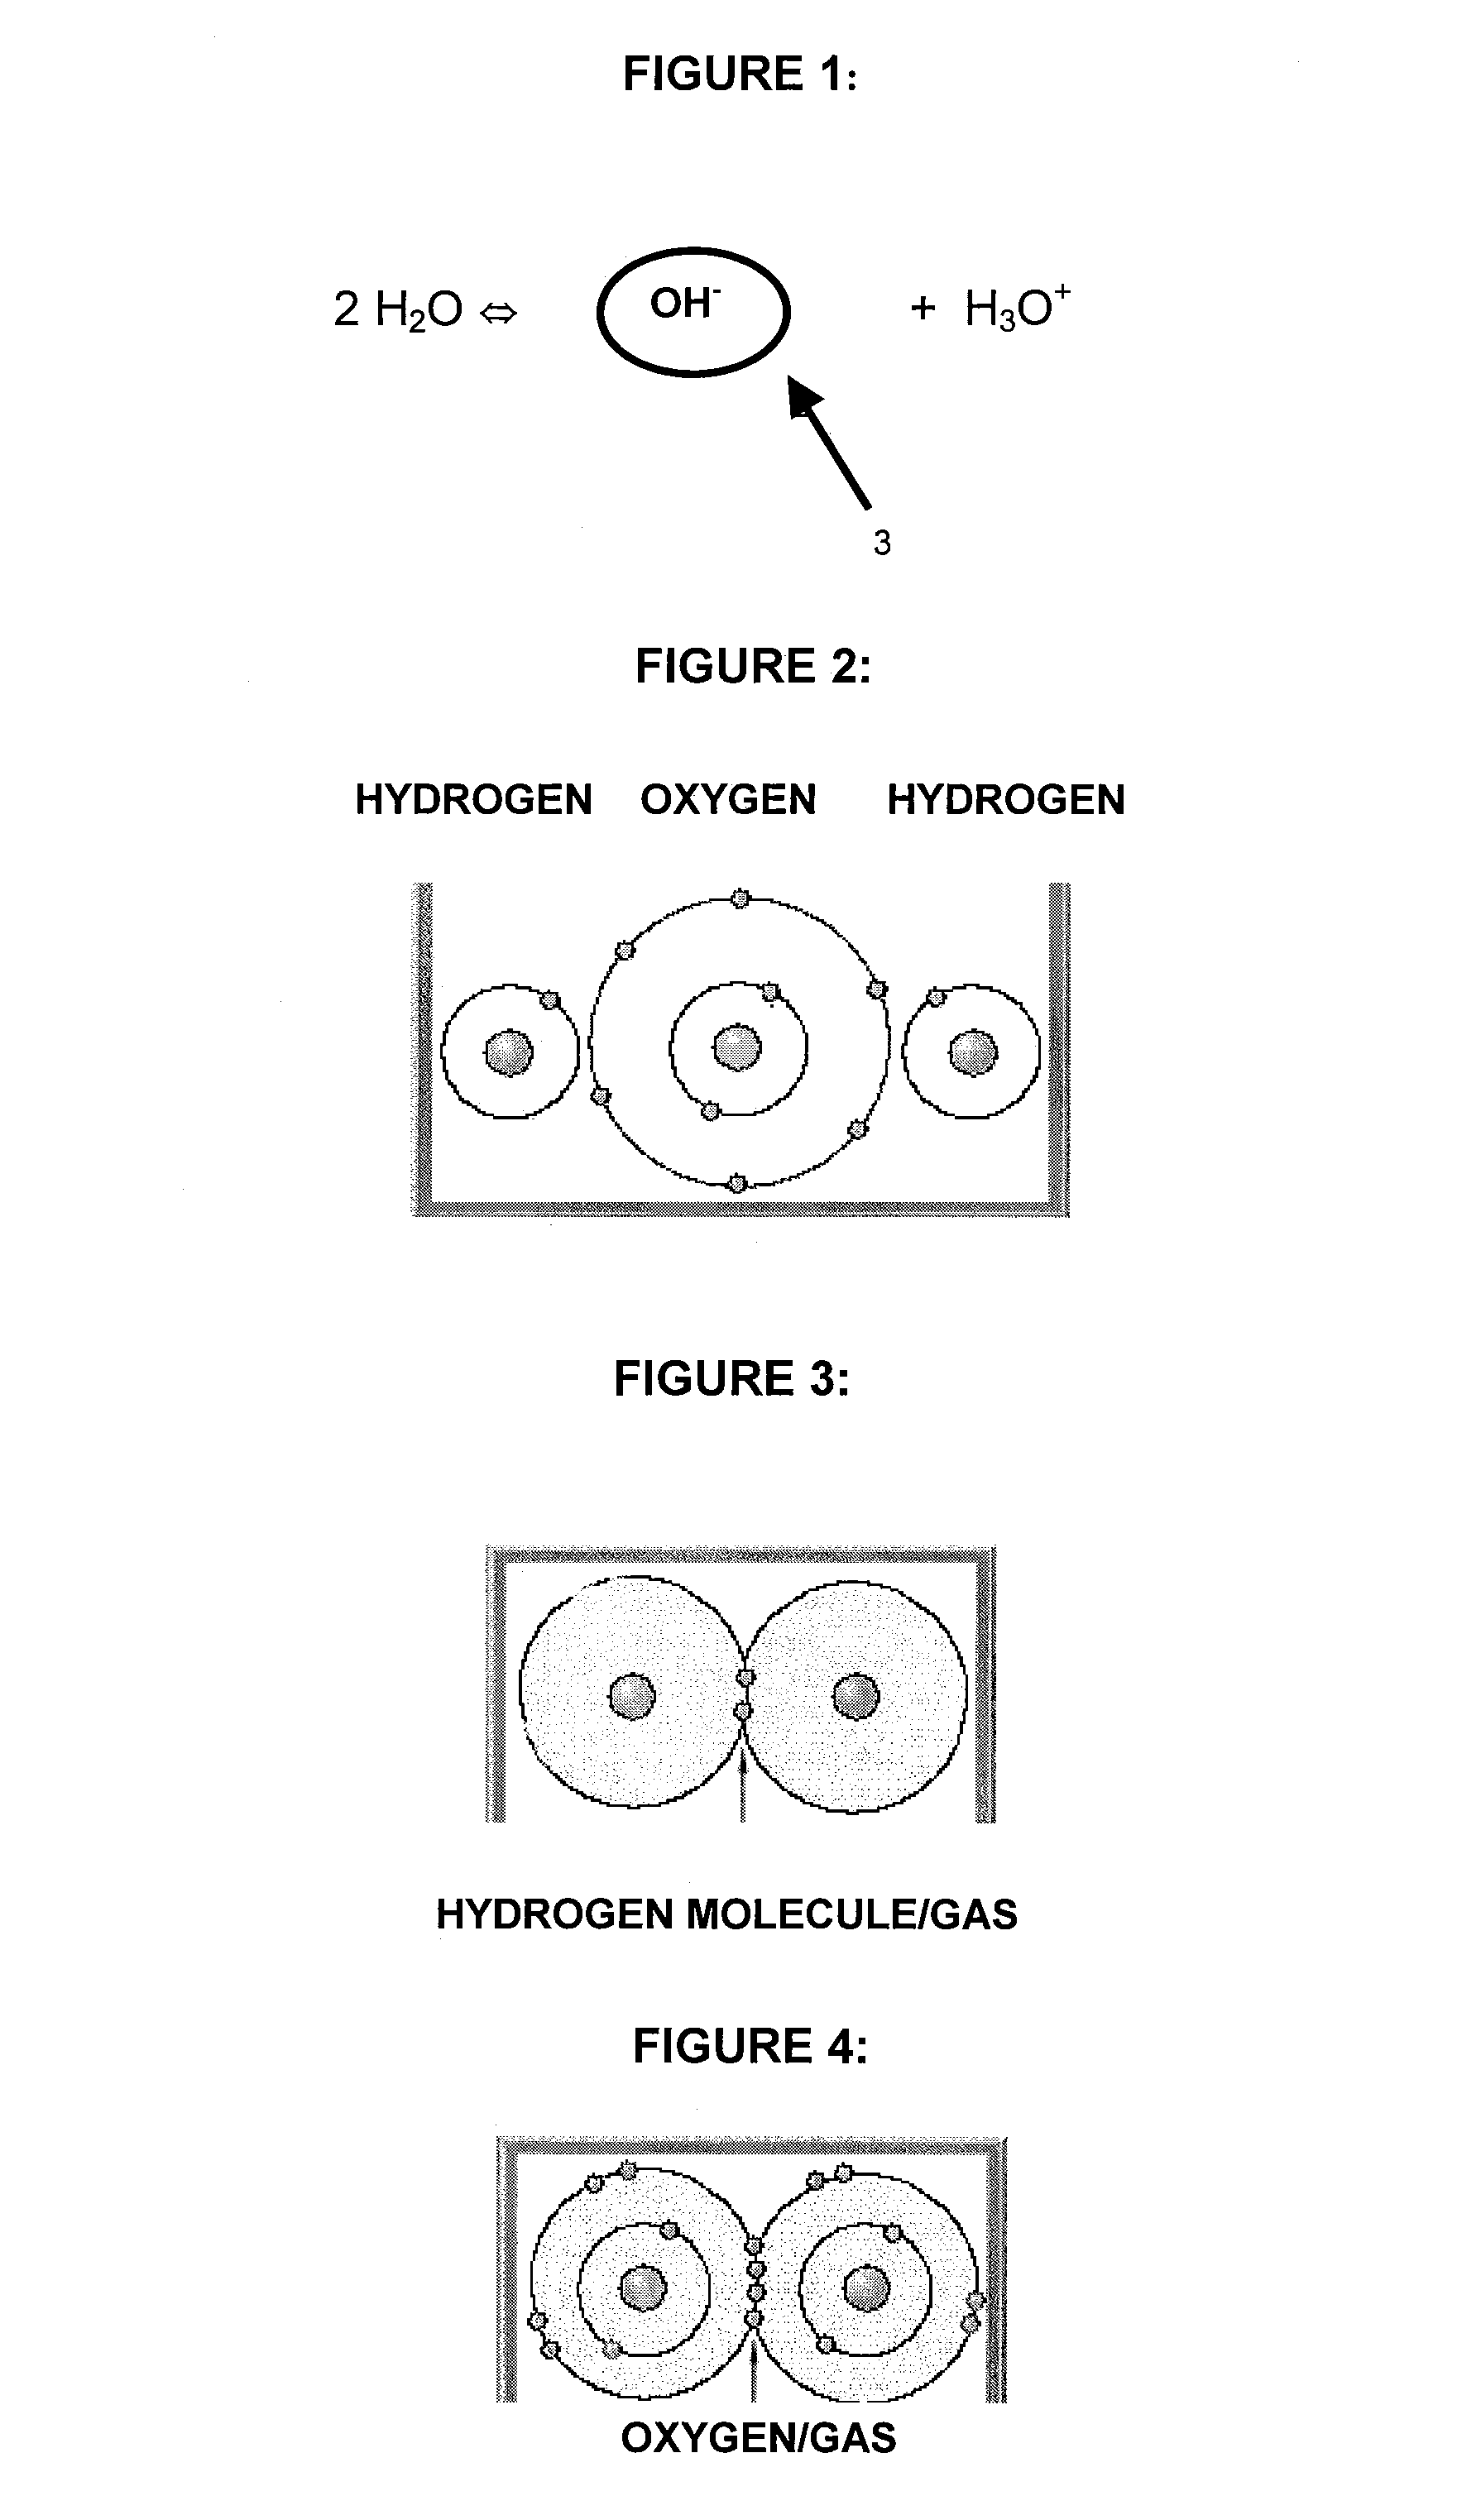 Process and apparatus for decontaminating water by producing hydroxyl ions through hydrolysis of water molecules